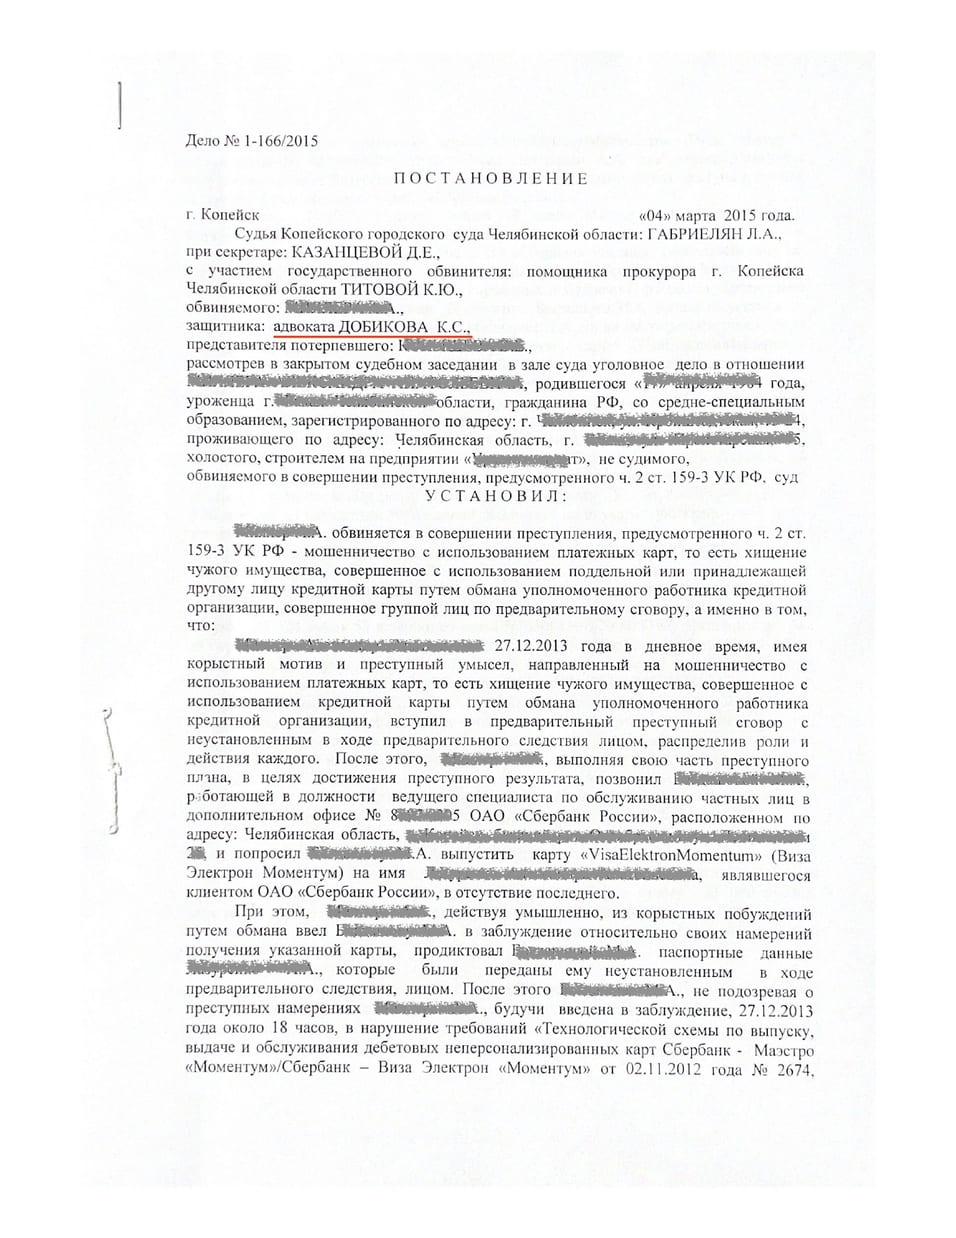 Ч.2 ст. 159.3 УК РФ.